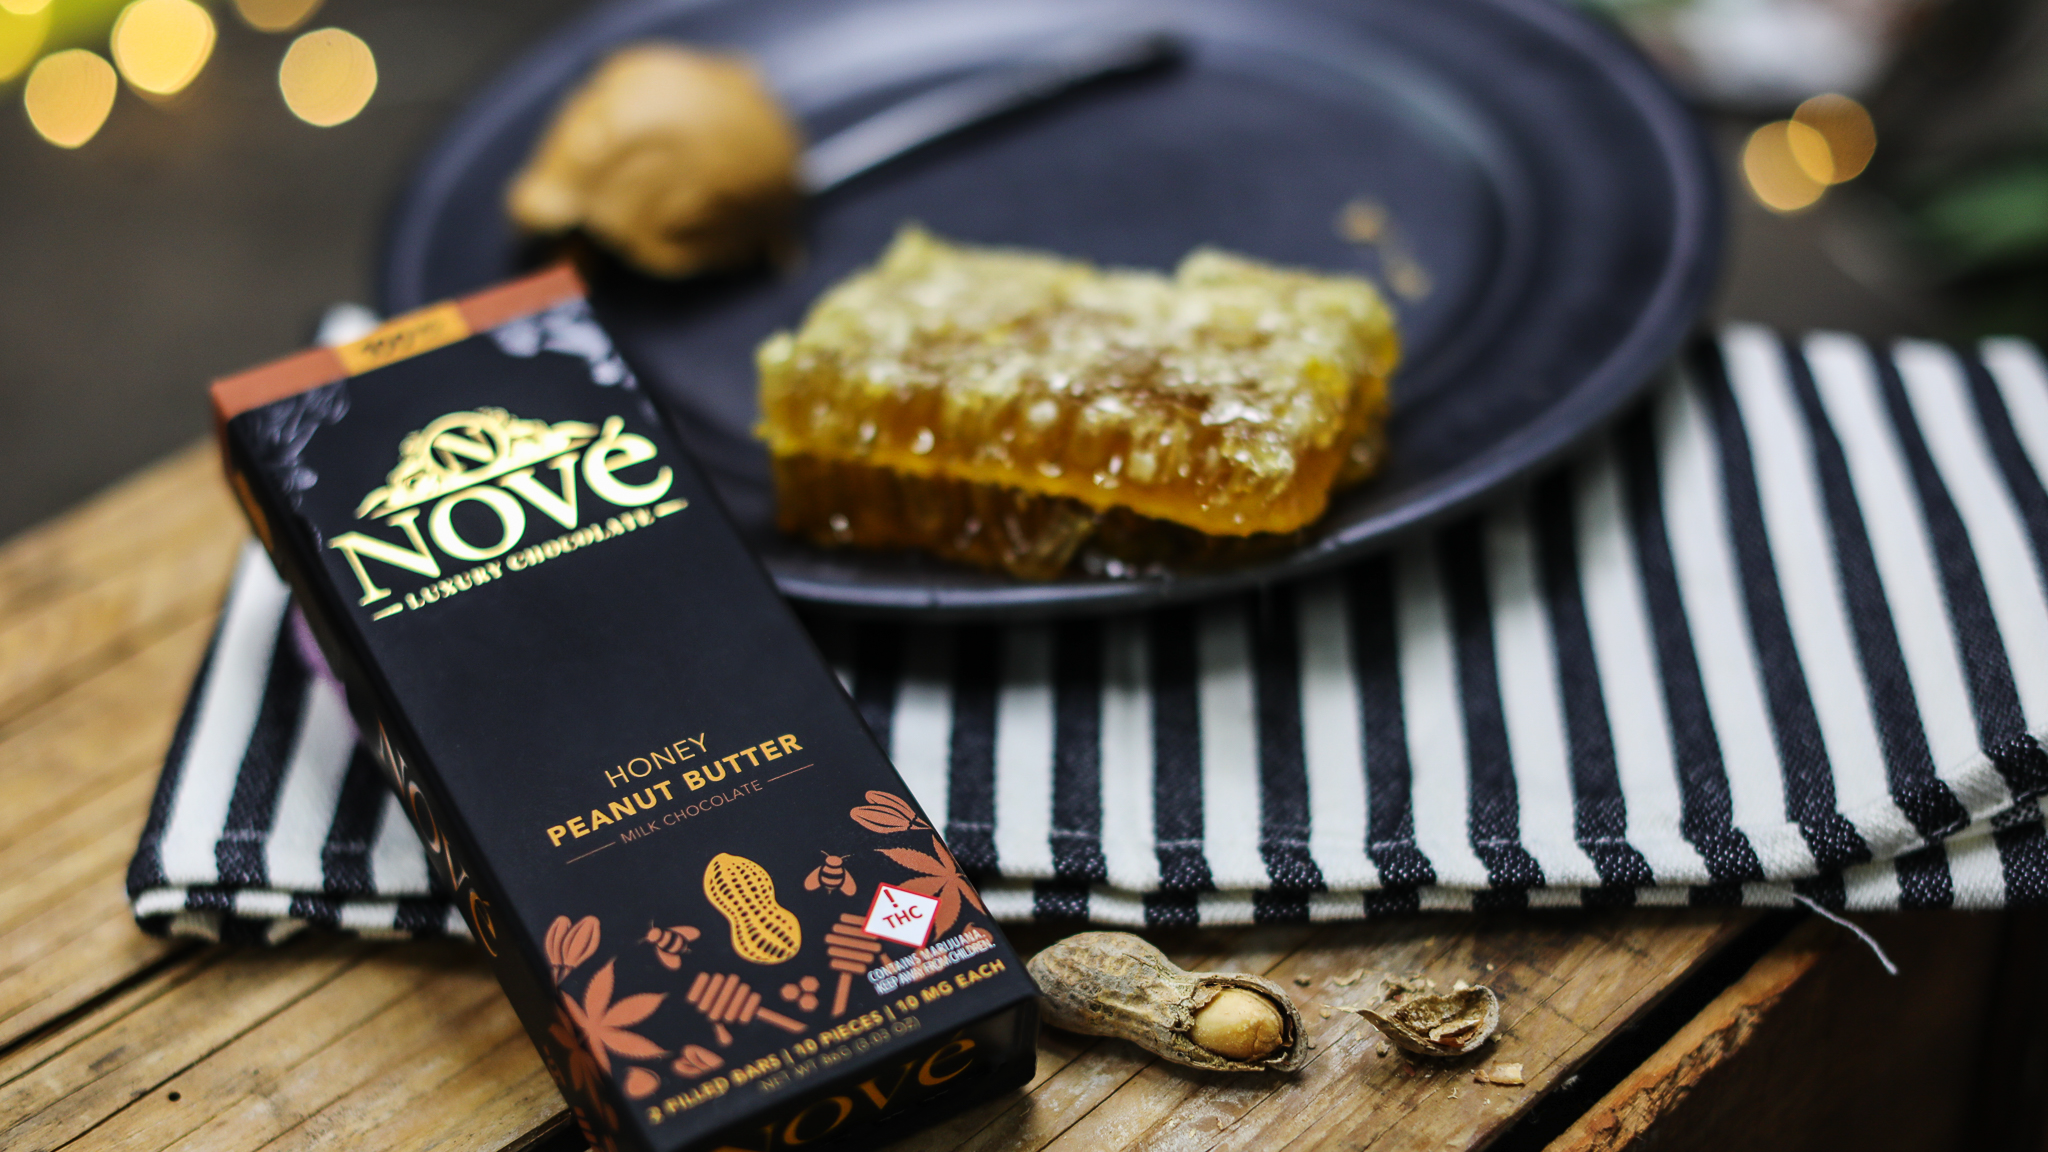 Nove Honey Peanut Butter cannabis chocolate resting next to fresh honeycomb and peanuts.